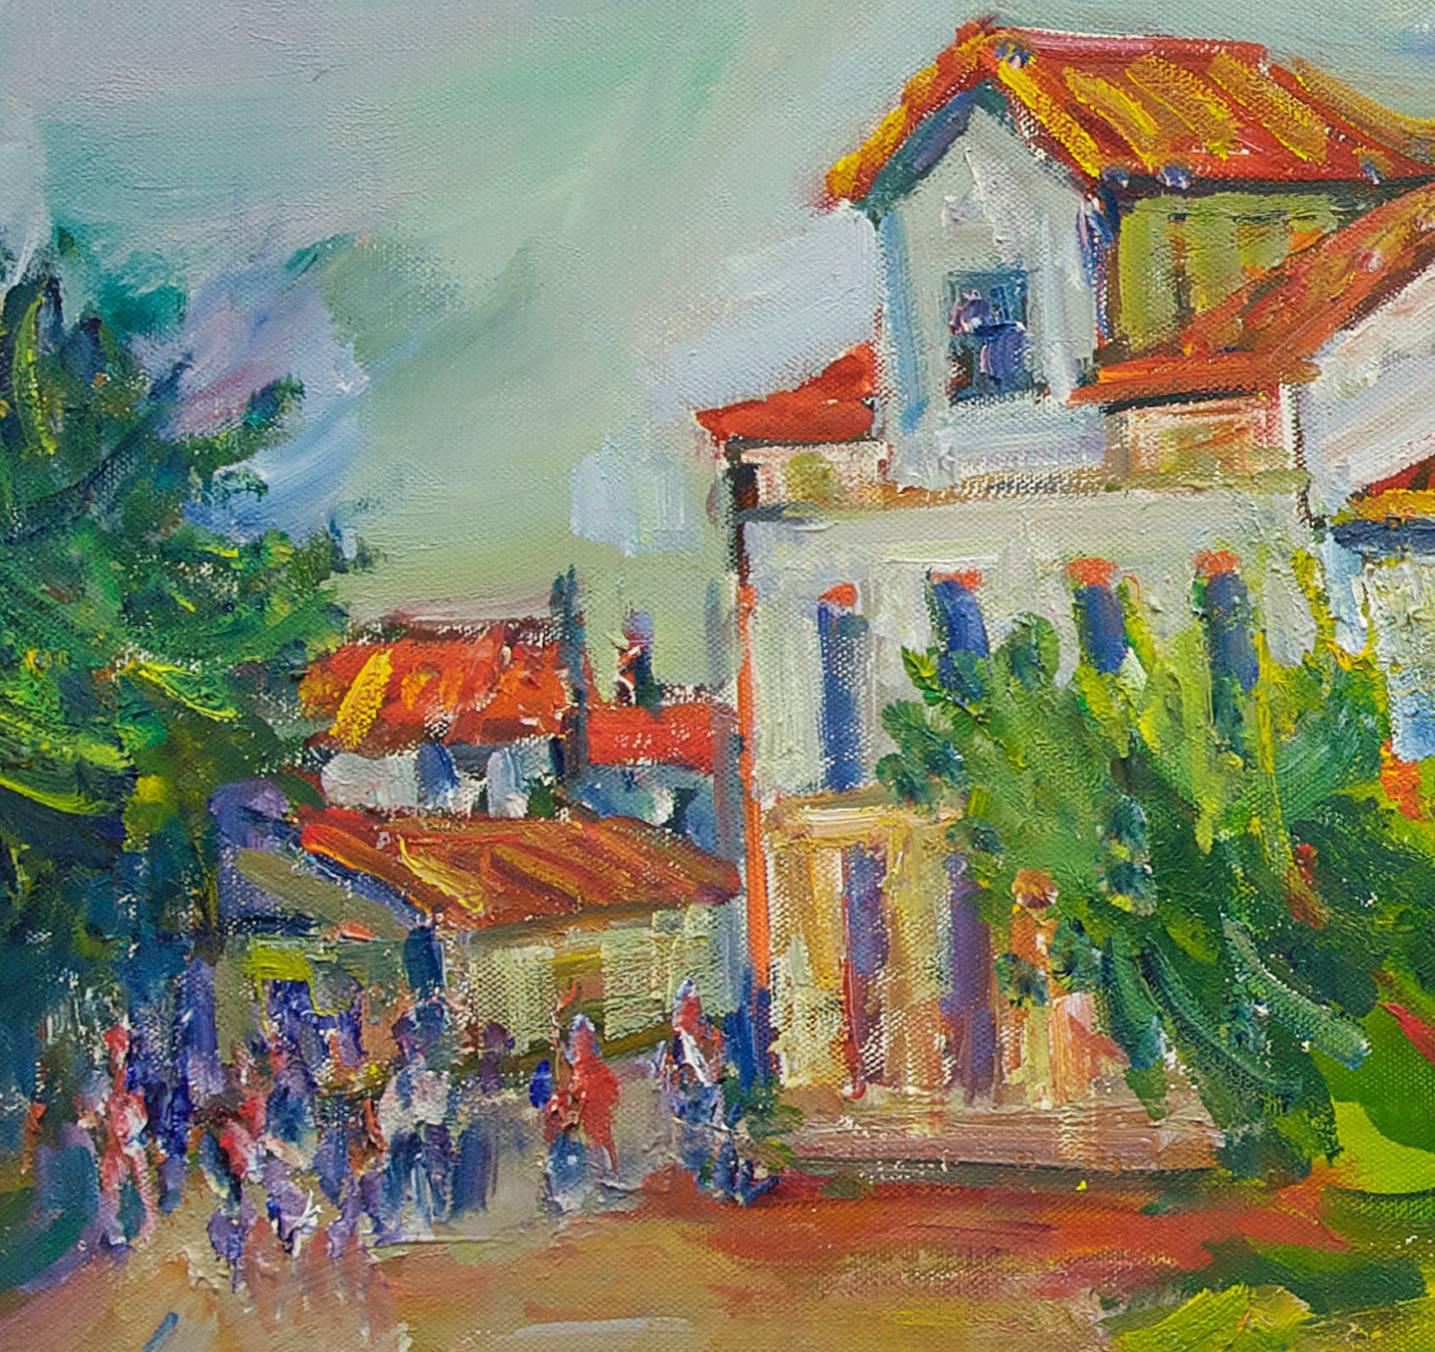 Farmhouse in Provence, Post Impressionist Oil on Canvas - Post-Impressionist Painting by Jacques Zucker